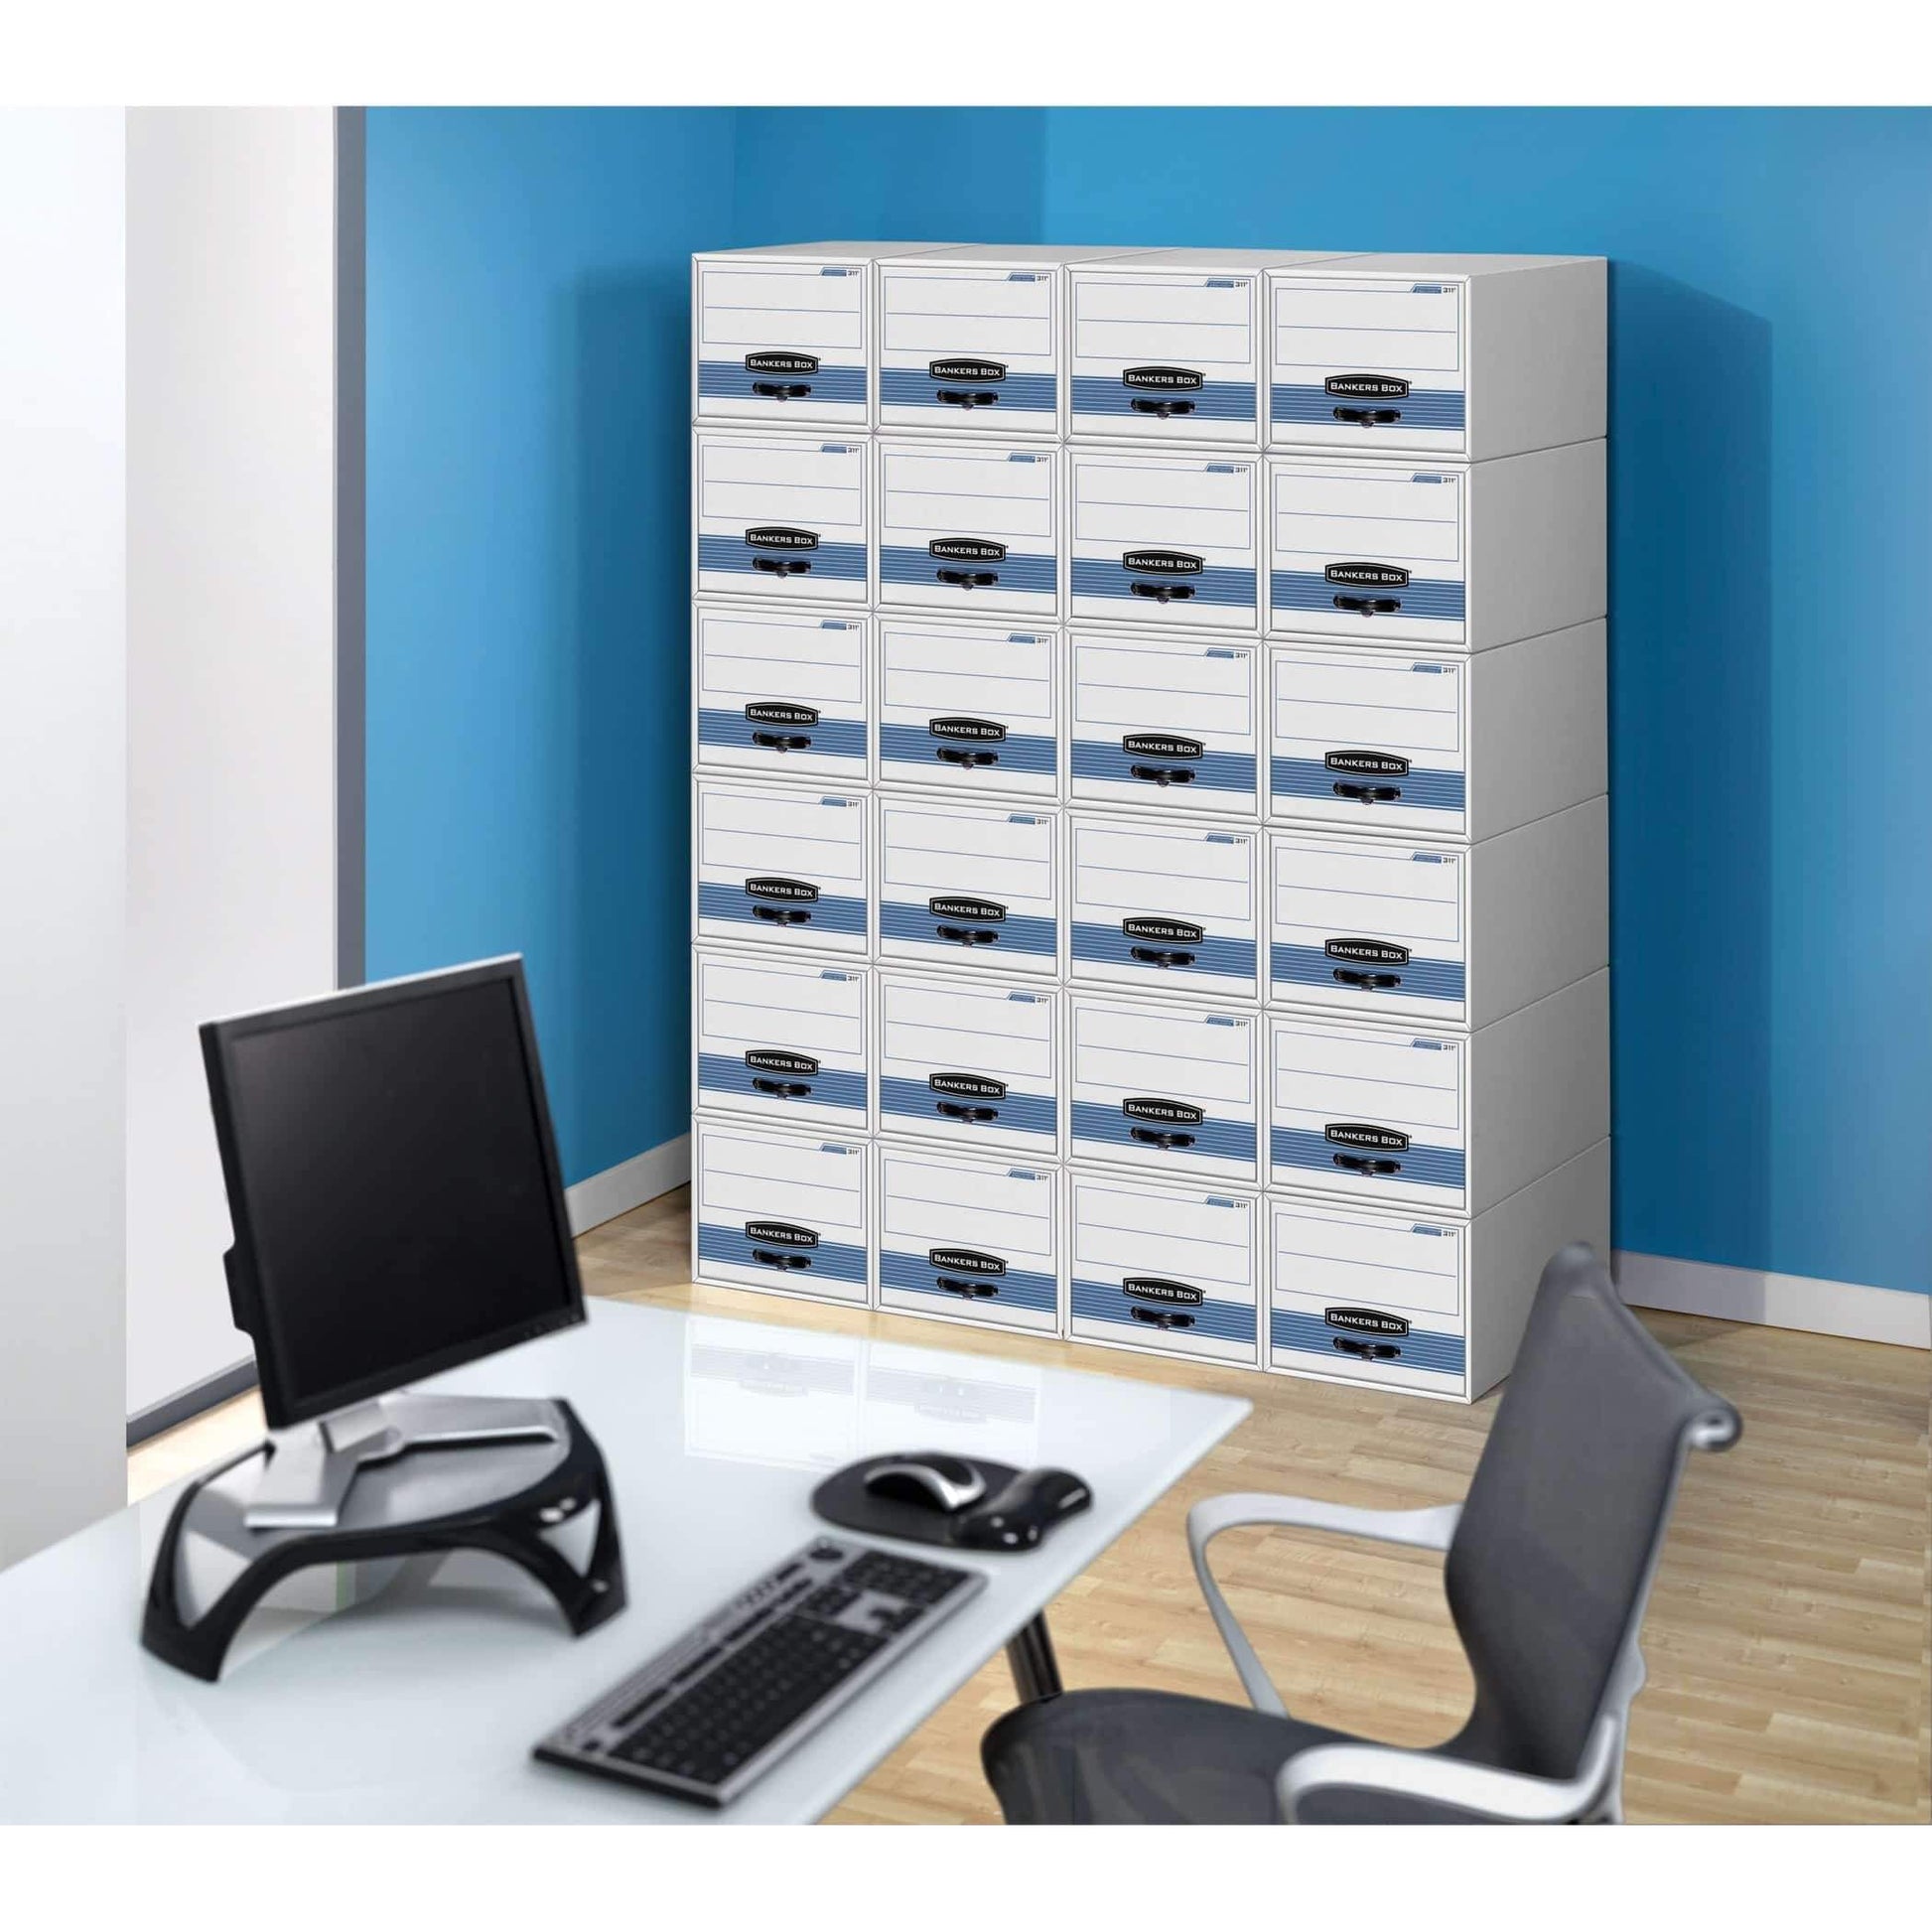 The best bankers box stor drawer steel plus extra space saving filing cabinet stacks up to 5 high legal 6 pack 00312